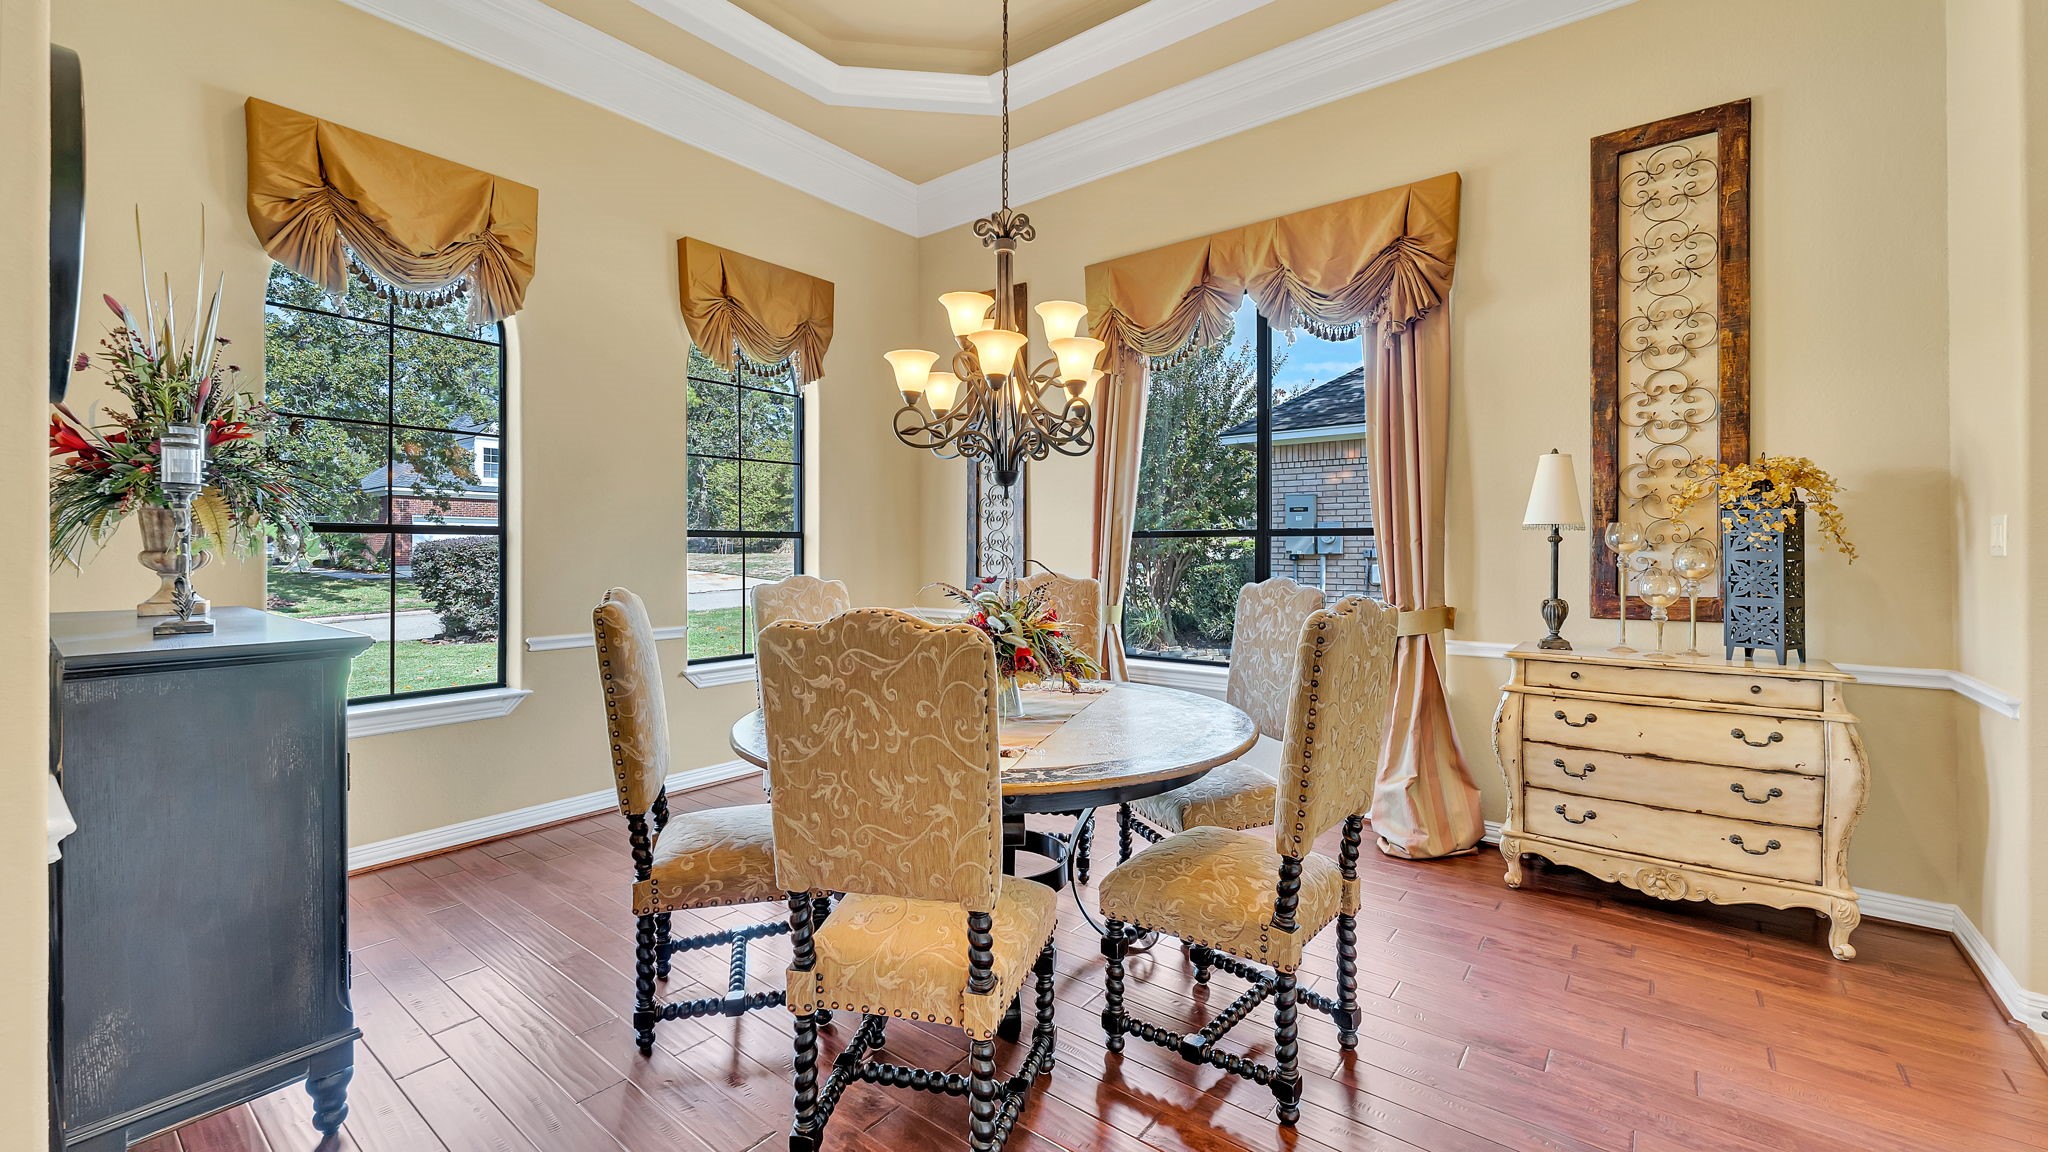 As you step inside you're greeted by an open spacious formal dining.